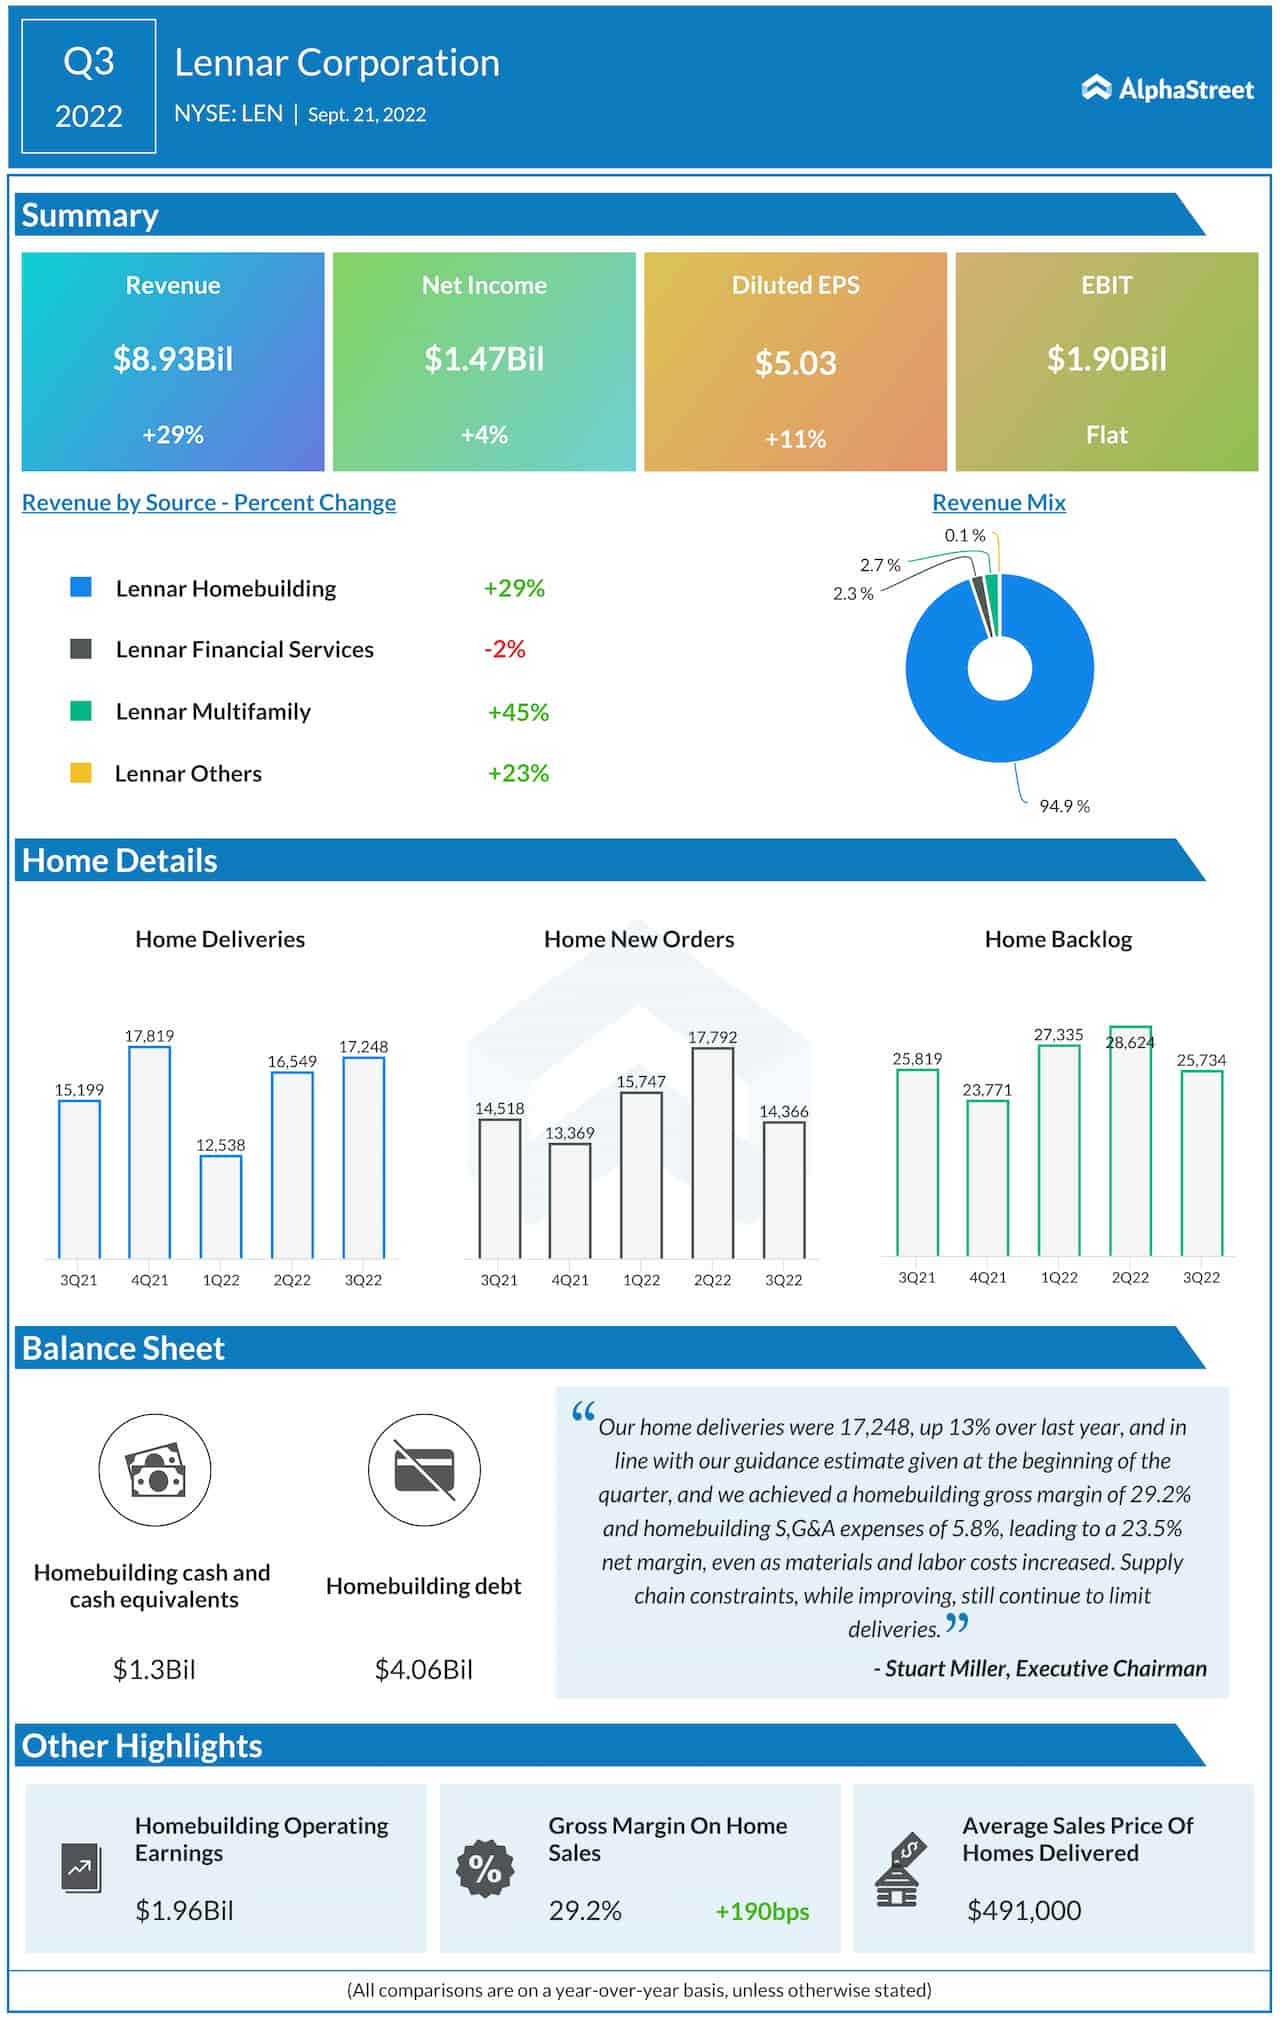 Lennar Corporation Q3 2022 earnings infographic